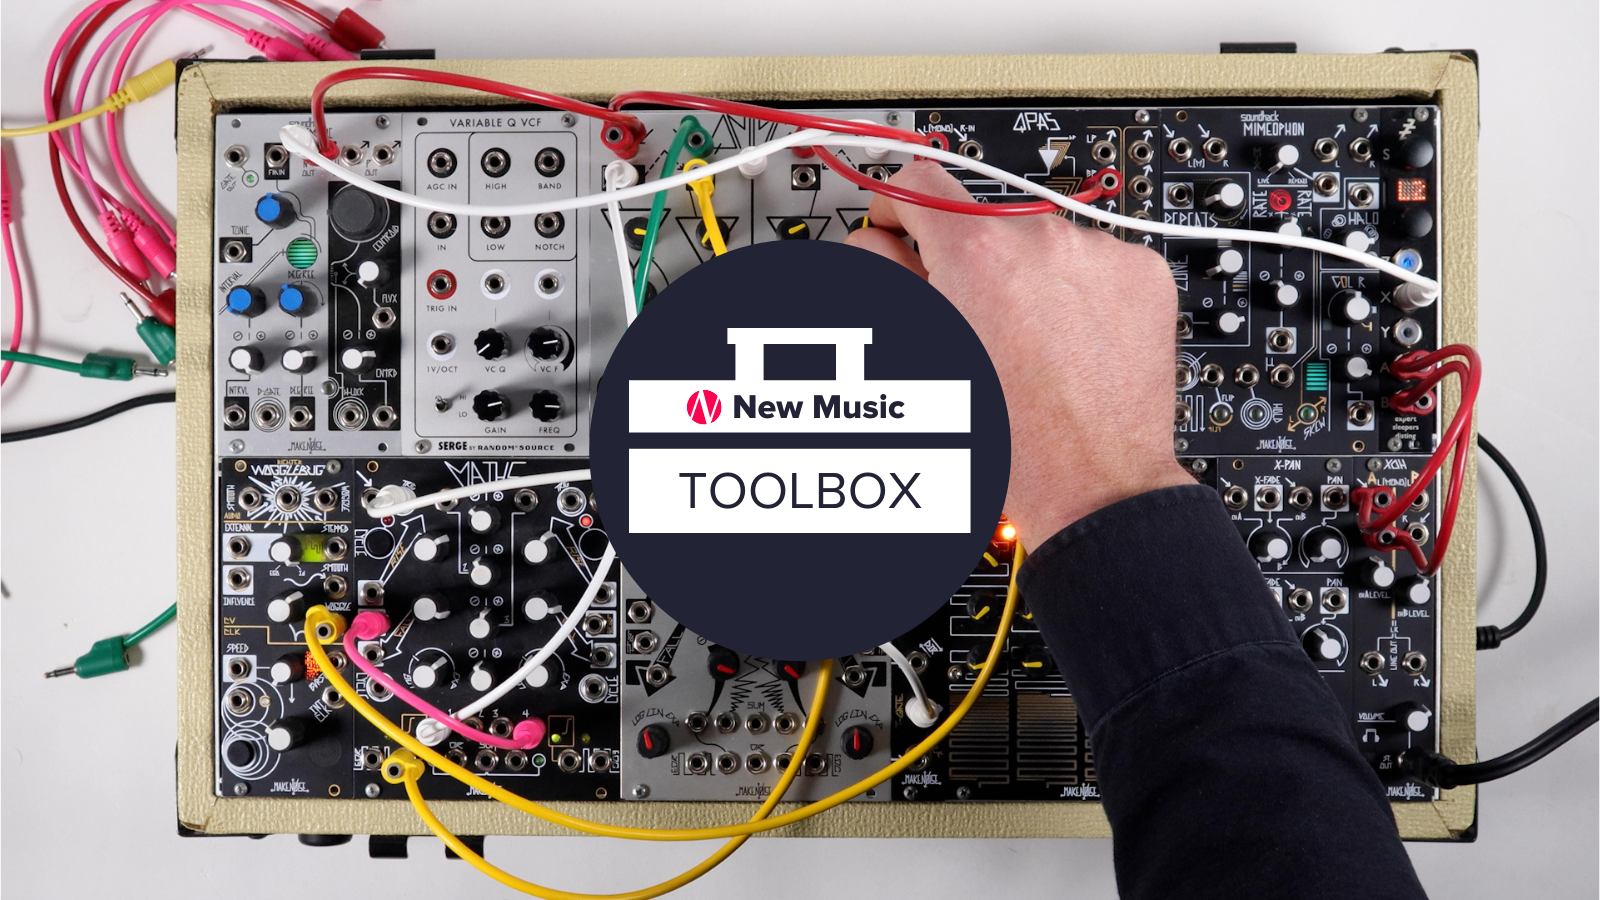 A hand manipulating a patch cord on a synthesizer with lots of patches and an overlay of the New Music Toolbox logo